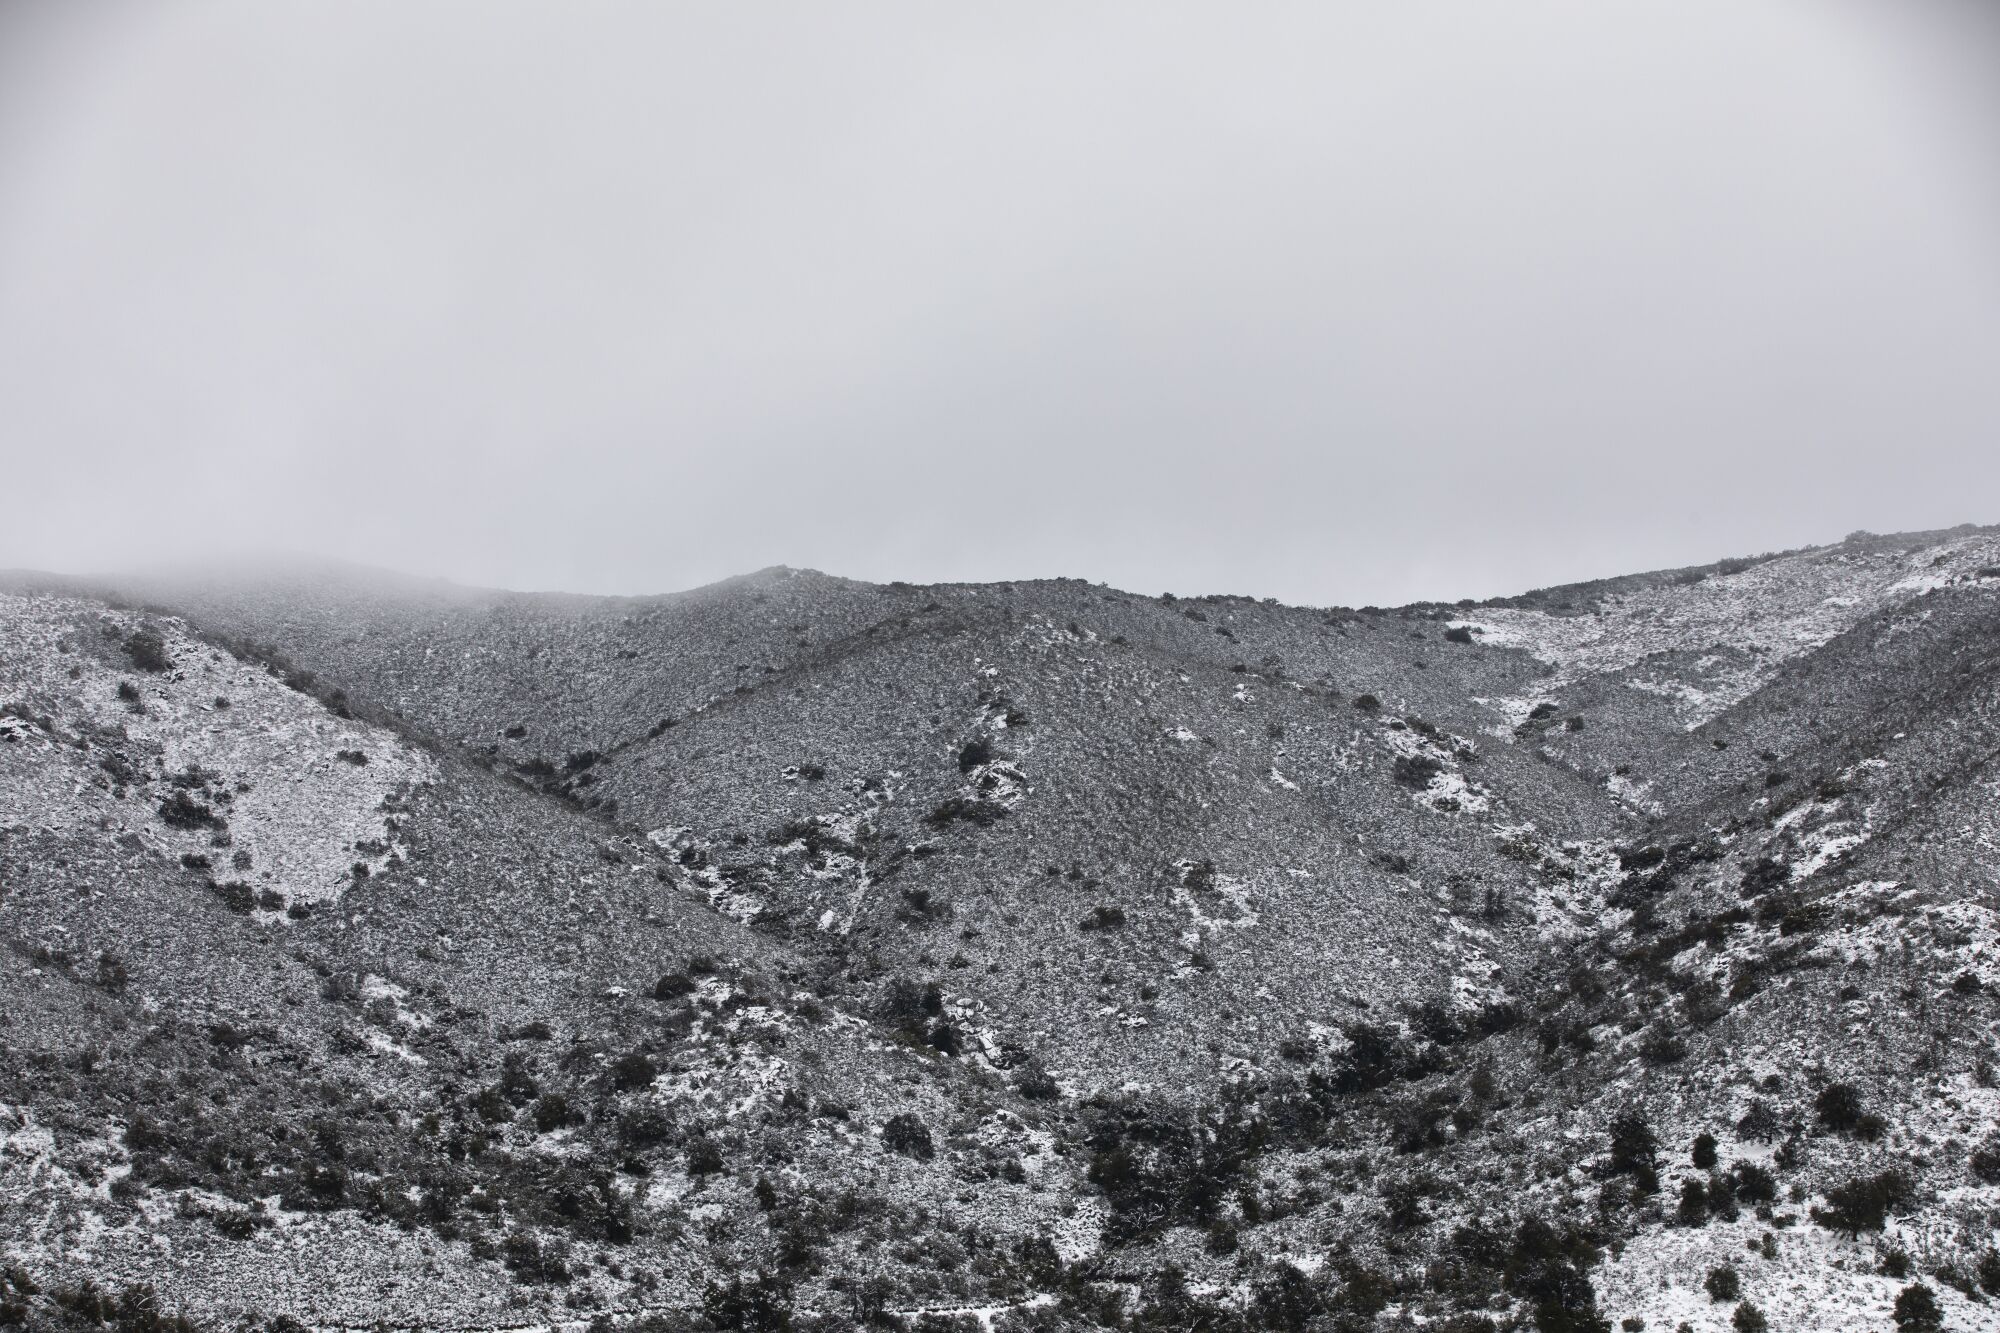 Severe weather including snow and rain hit San Diego County on Thursday, Feb. 23, 2023.